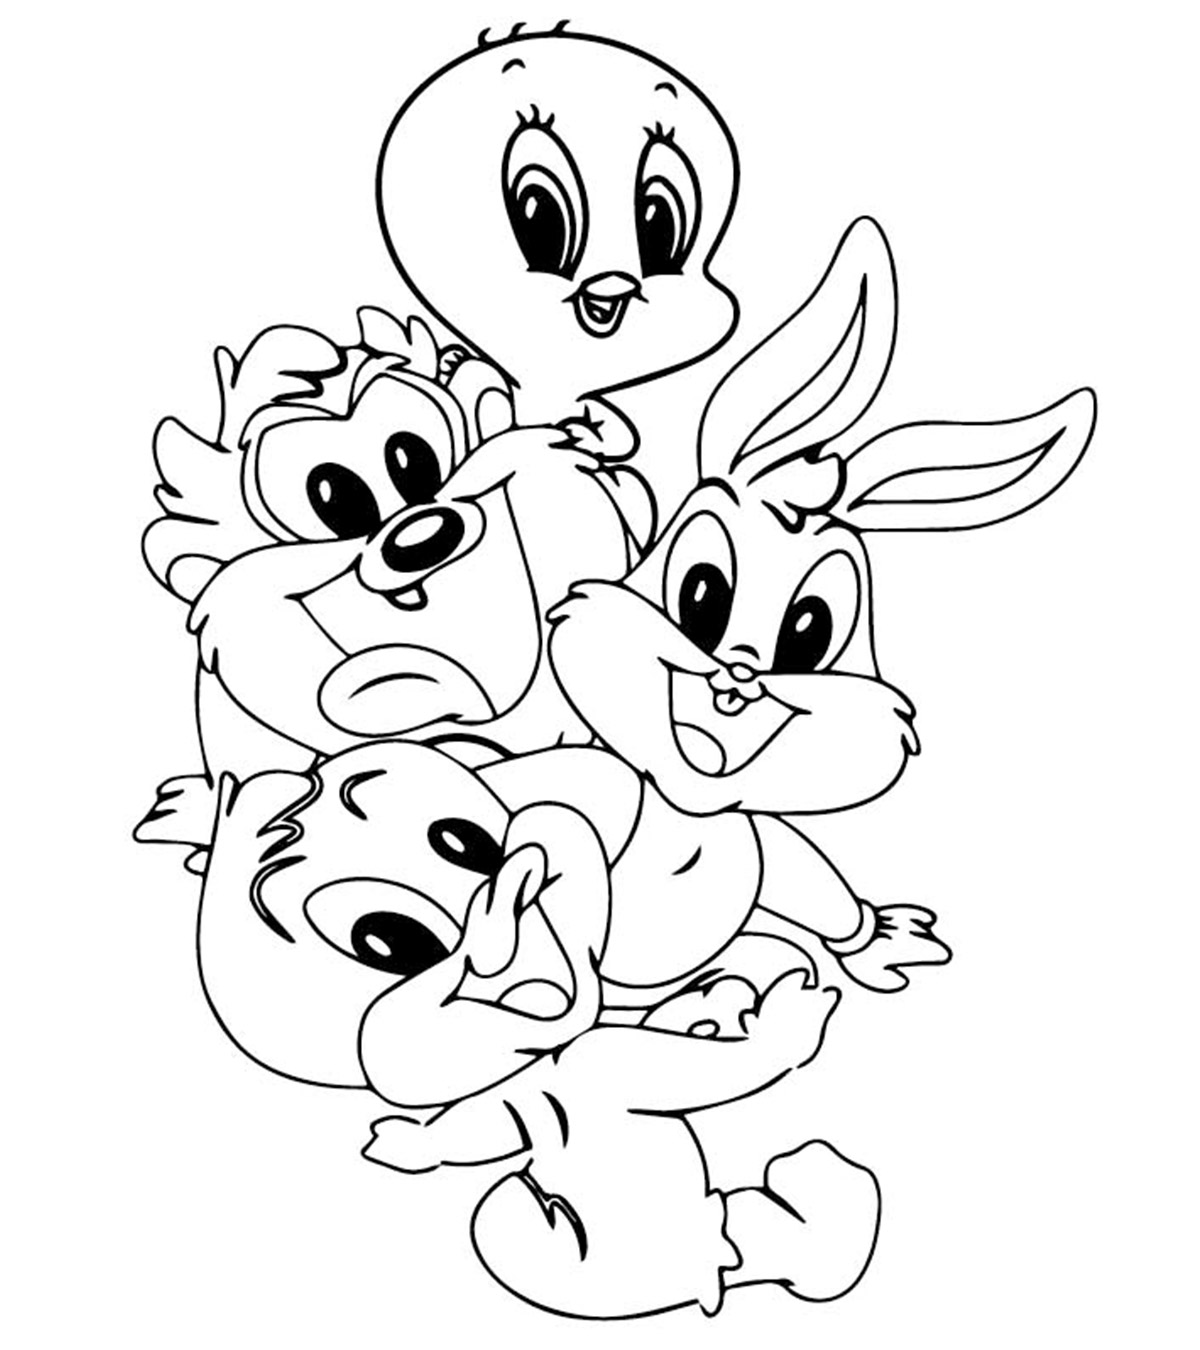 tweety bird and sylvester coloring pages